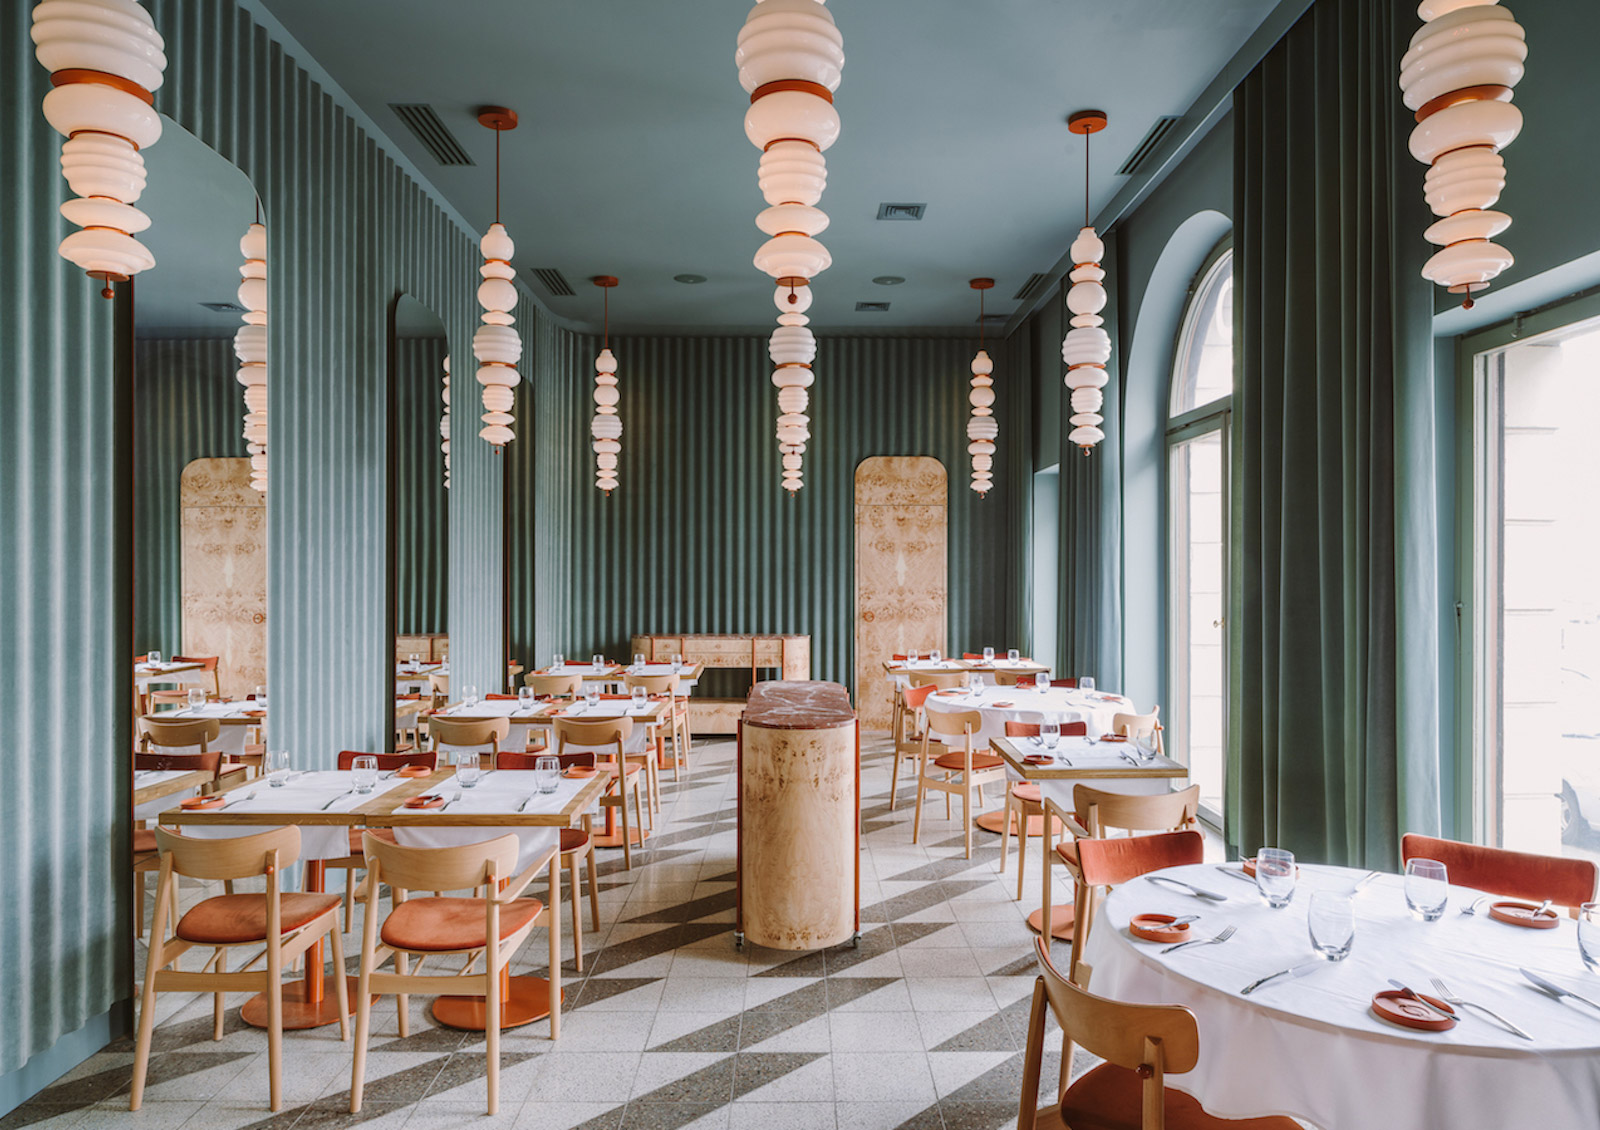 This cosy coral and sage-hued restaurant in Warsaw is already scooping up major design world prestige